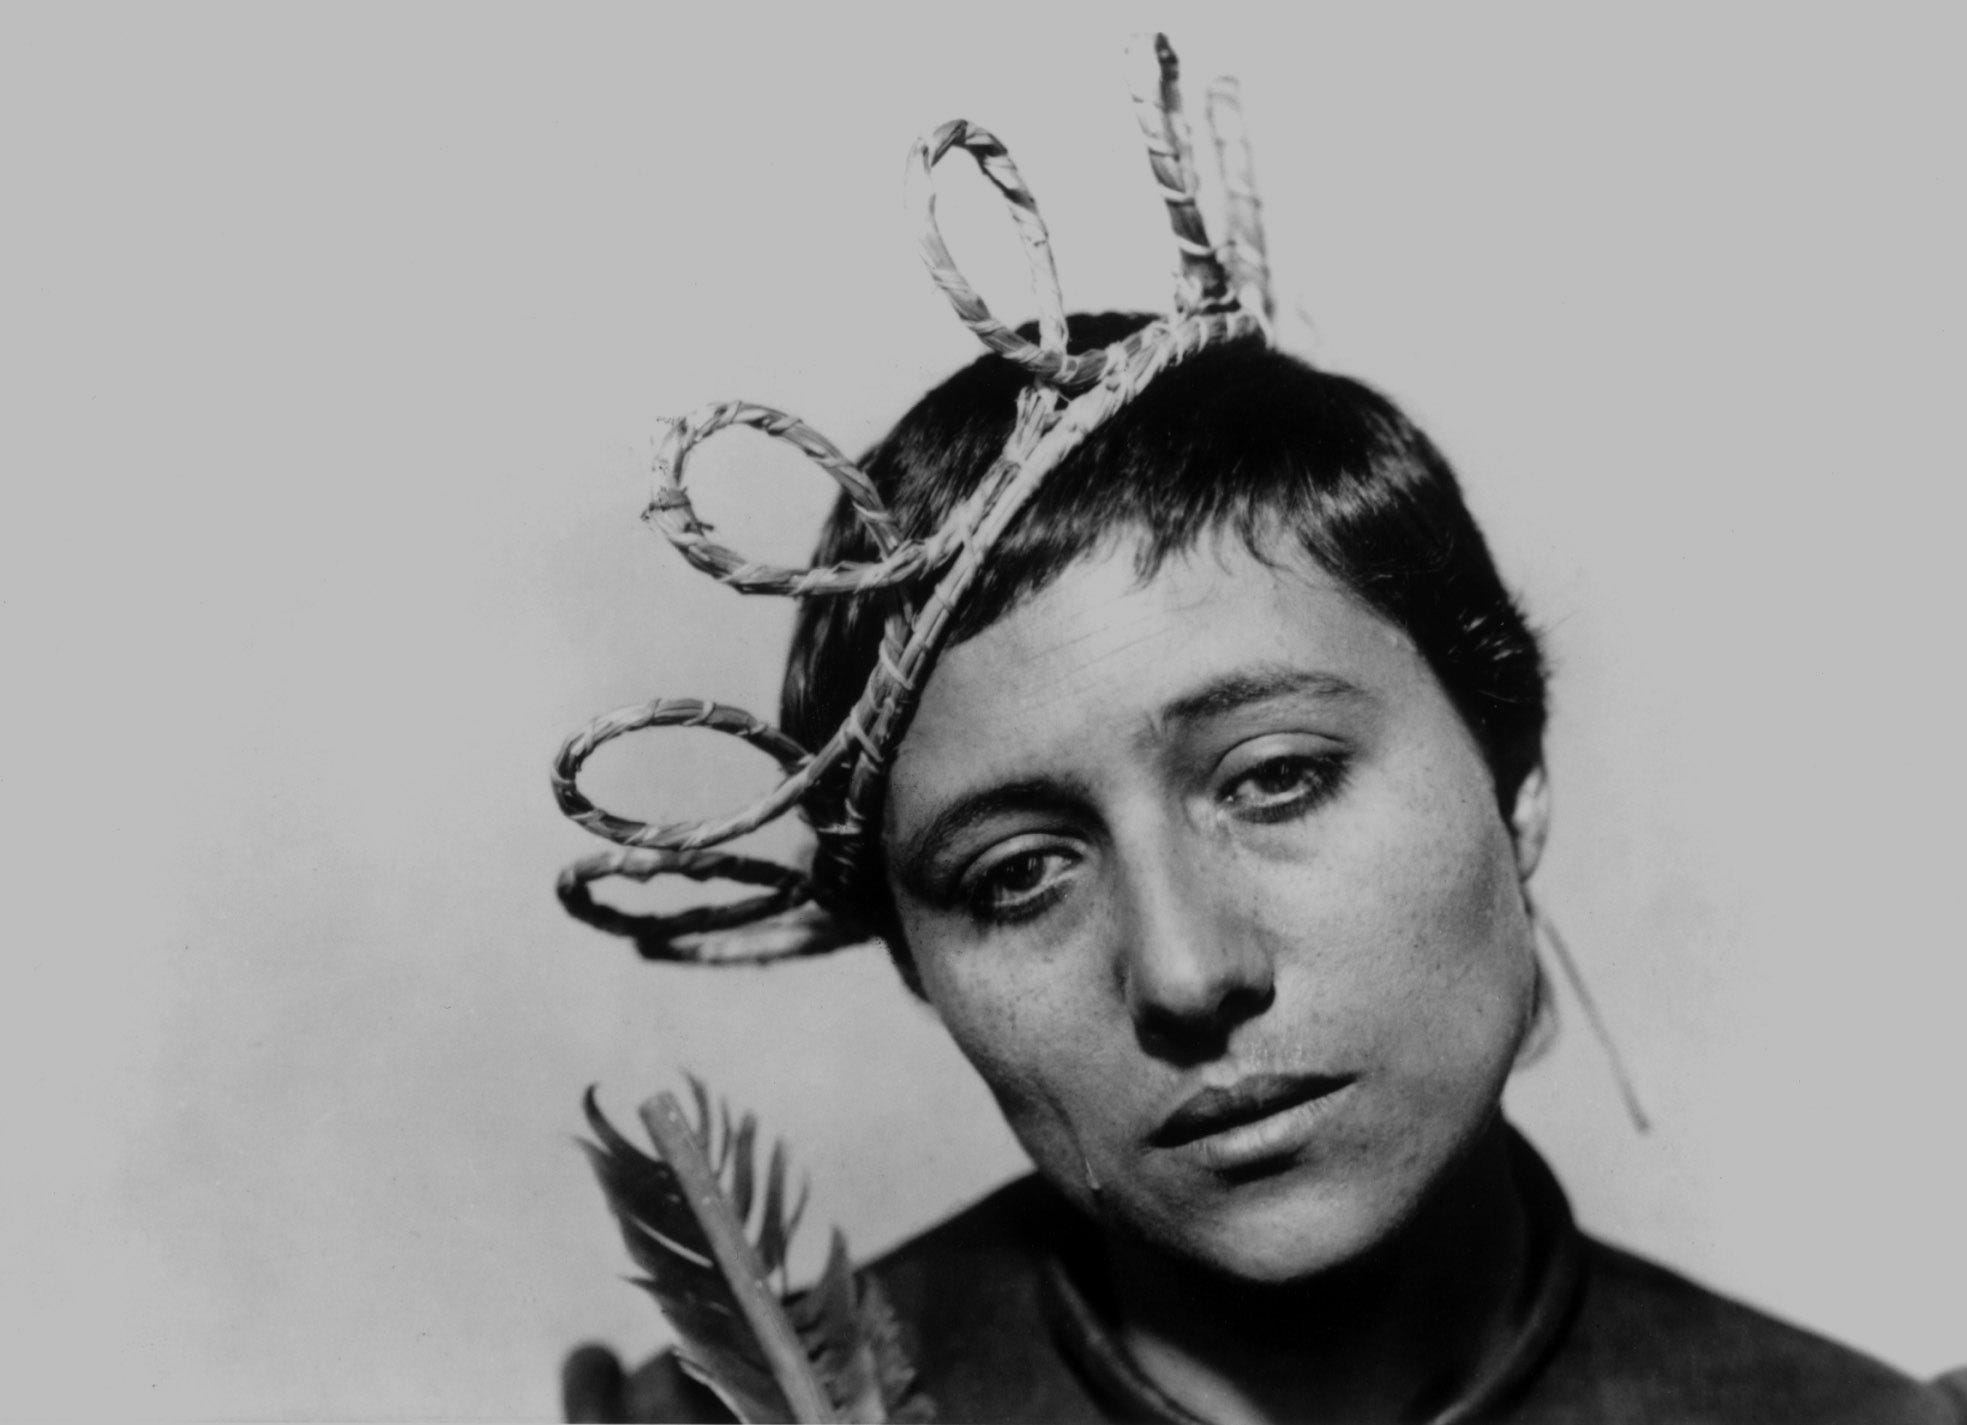 Still from The Passion of Joan of Arc. Joan looks despairing, dressed in a fake crown.